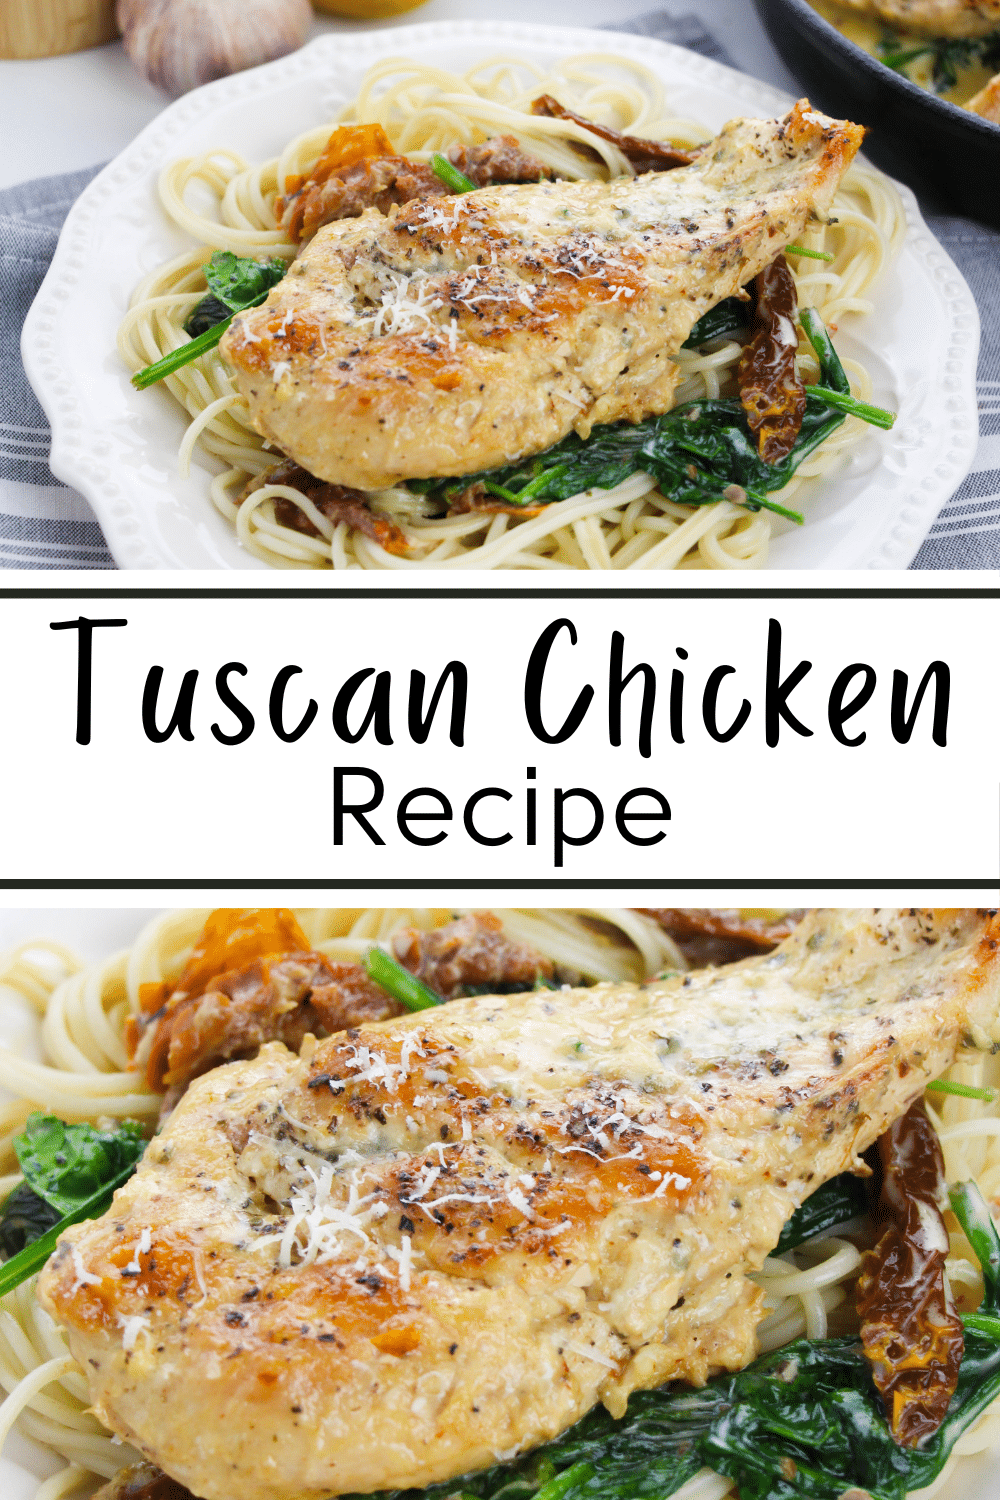 This Tuscan Chicken Recipe is one of the best meals when you want to make something quick and easy yet still delicious and nutritious! #tuscanchickenrecipe #creamytuscanchicken #creamytuscanchickenrecipe #tuscanchicken #chickenrecipe via @wondermomwannab